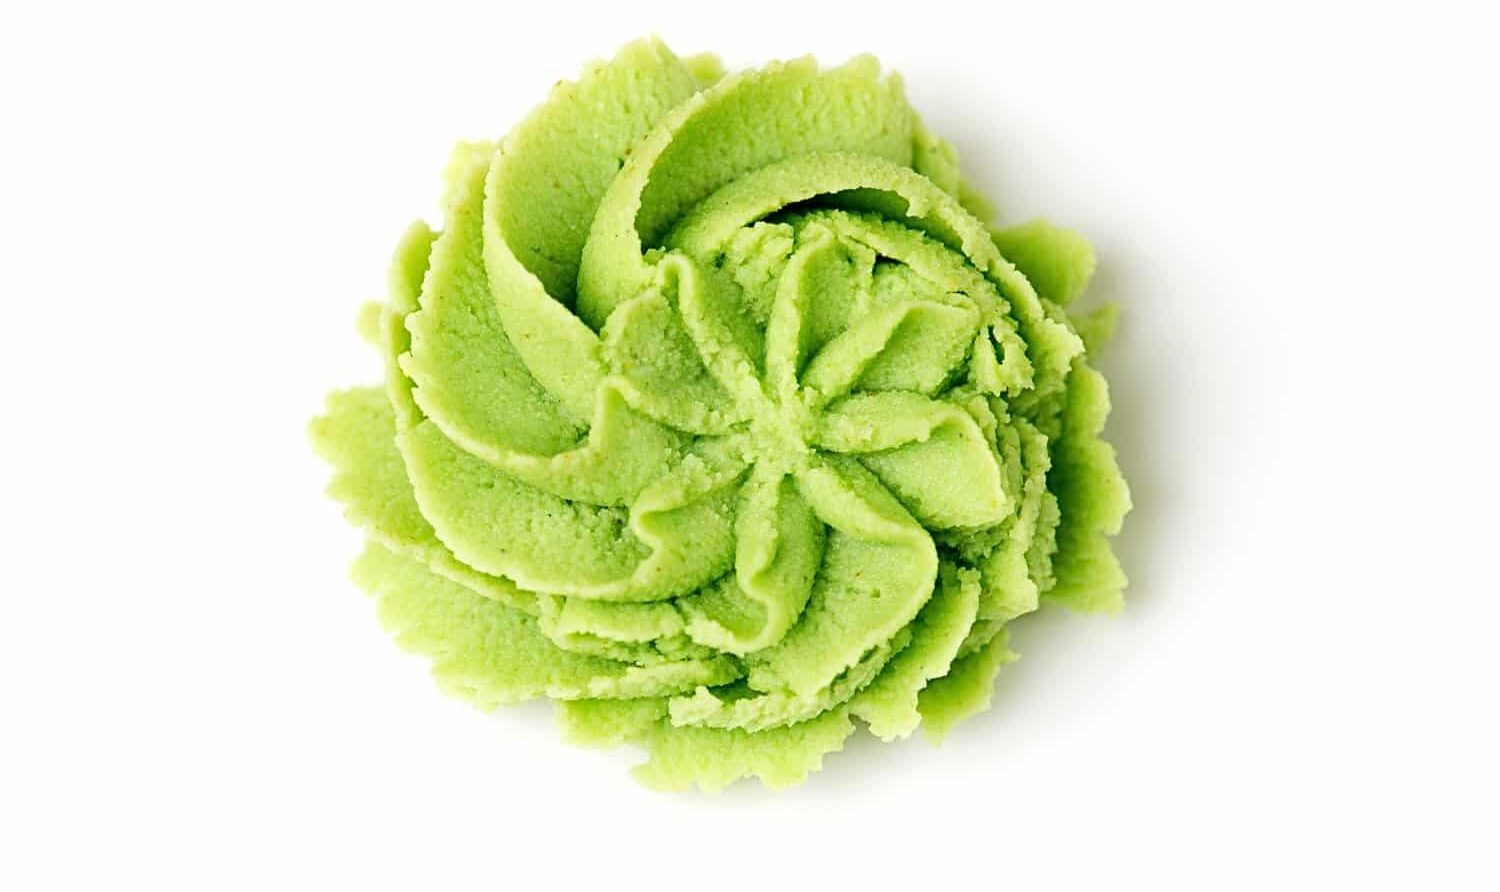 Looking down on wasabi paste that has been pressed from a frosting bag using a star tip, leaving behind a decorative flower-like shape.